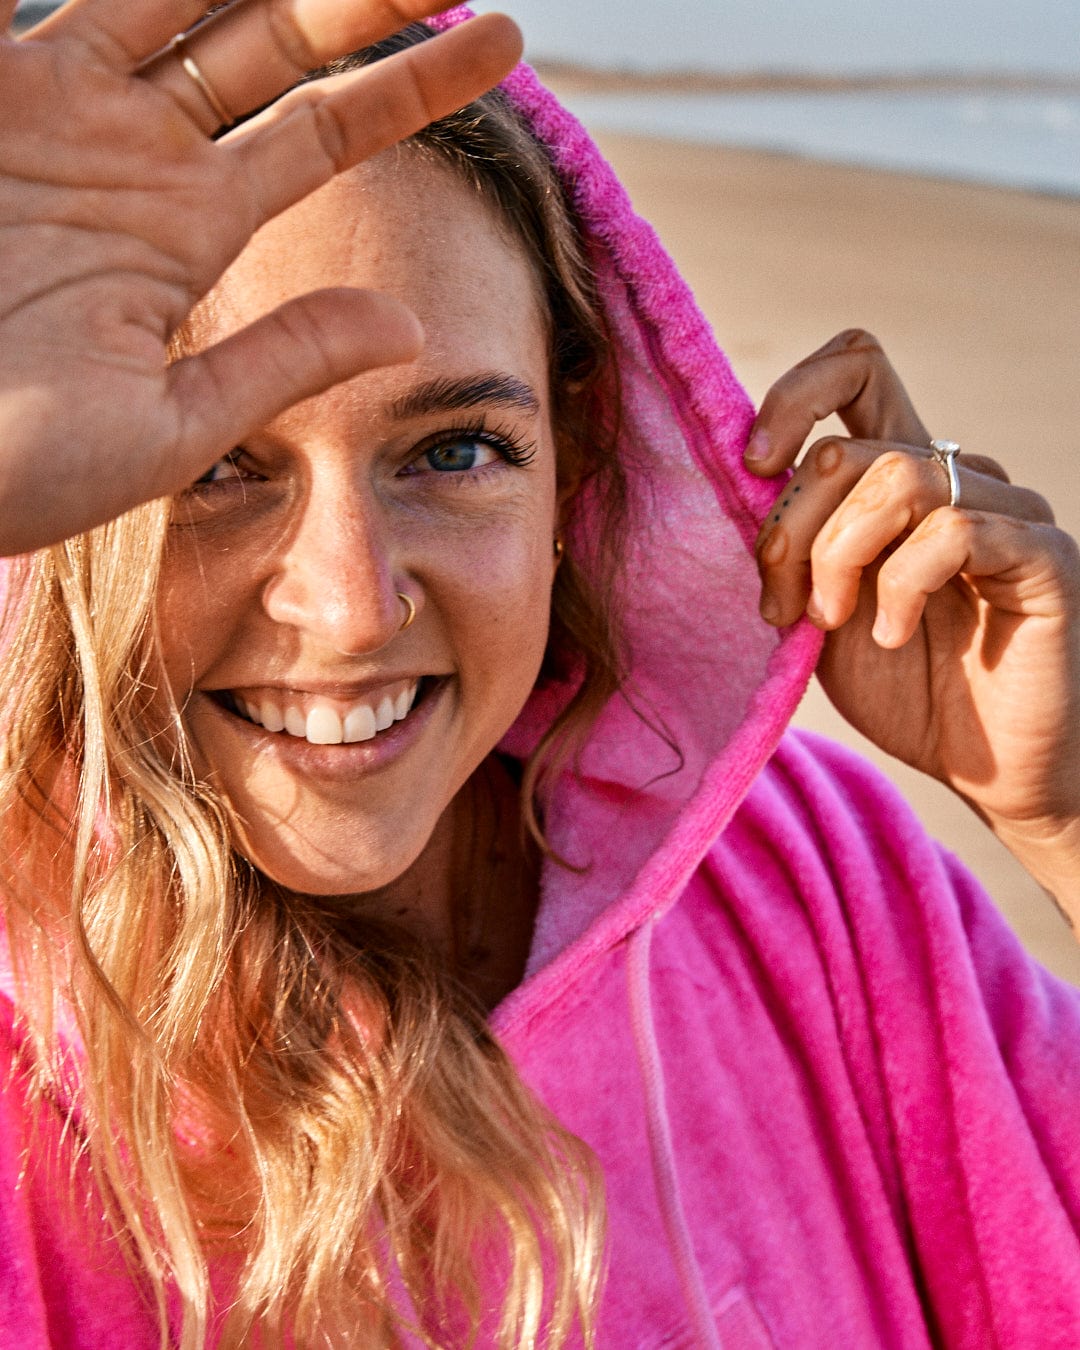 Woman in a pink, fast-drying Tropic Dip Changing Towel - Pink/Orange hoodie smiling at the camera, shielding her eyes from the sun with her hand, at the beach. (Saltrock)